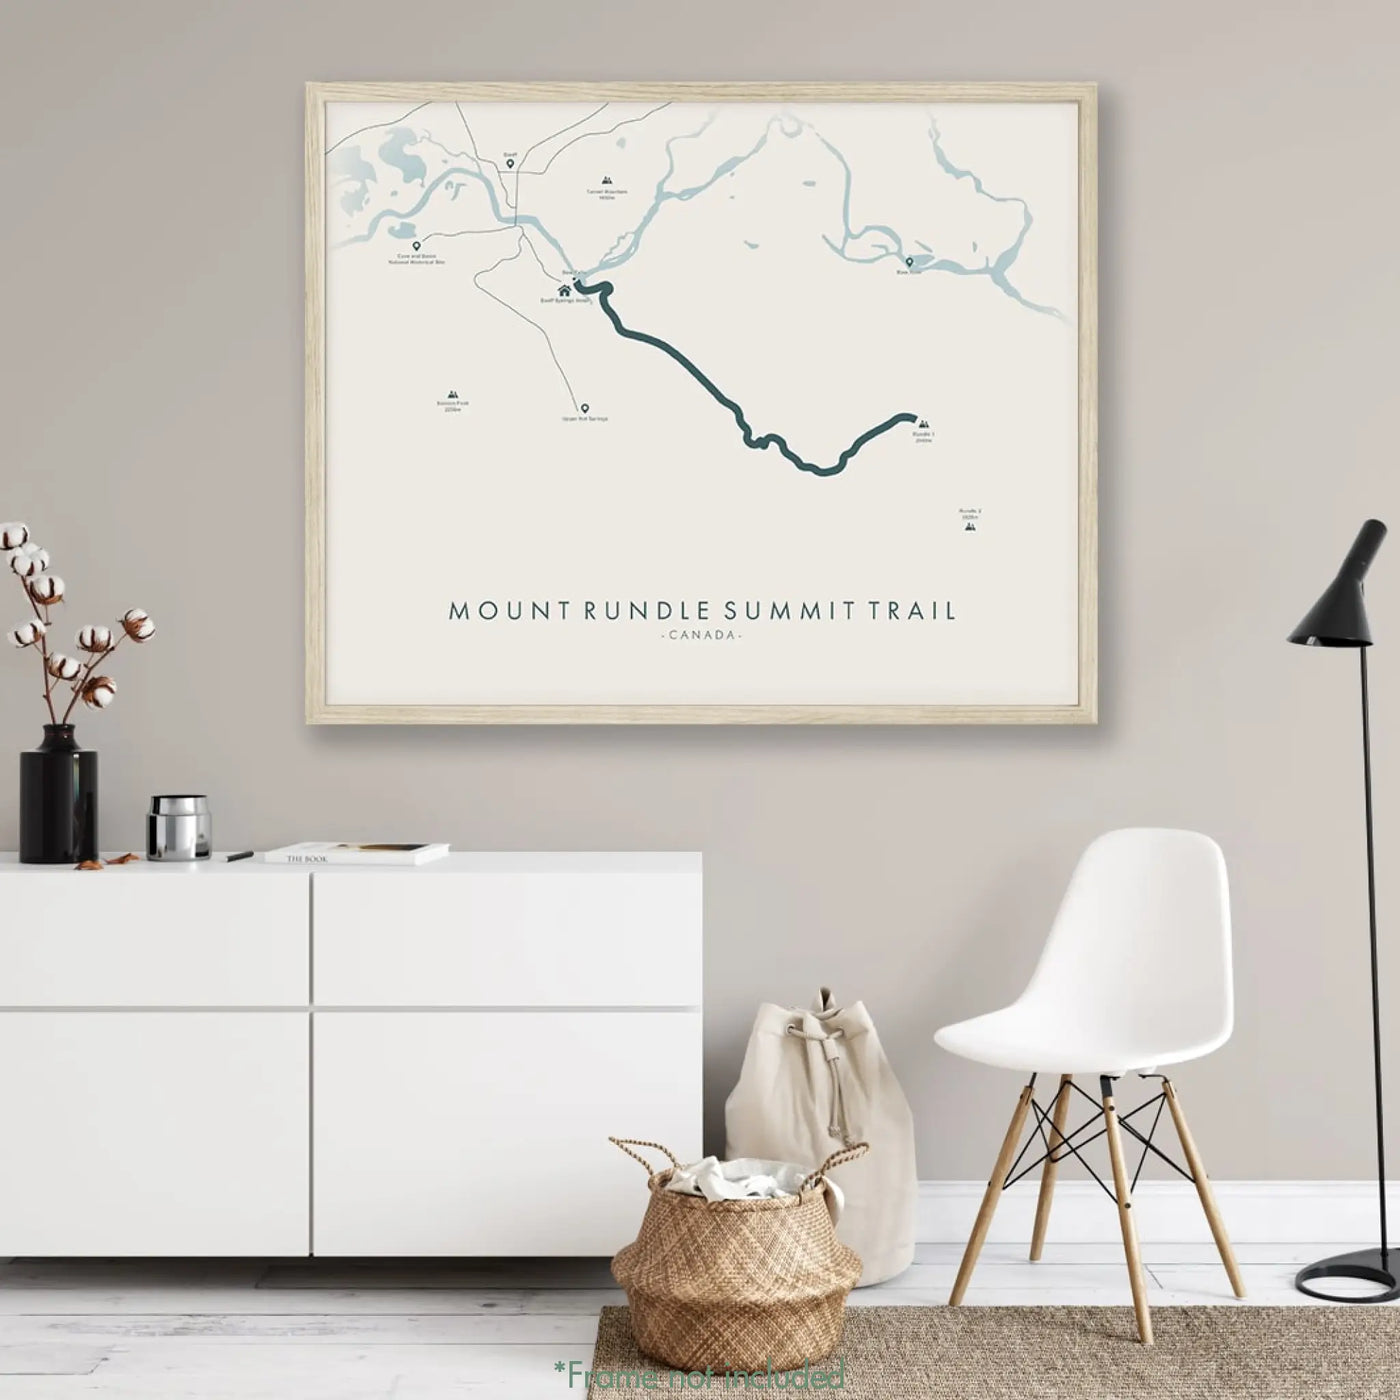 Trail Poster of Mount Rundle Summit Trail - Beige Mockup